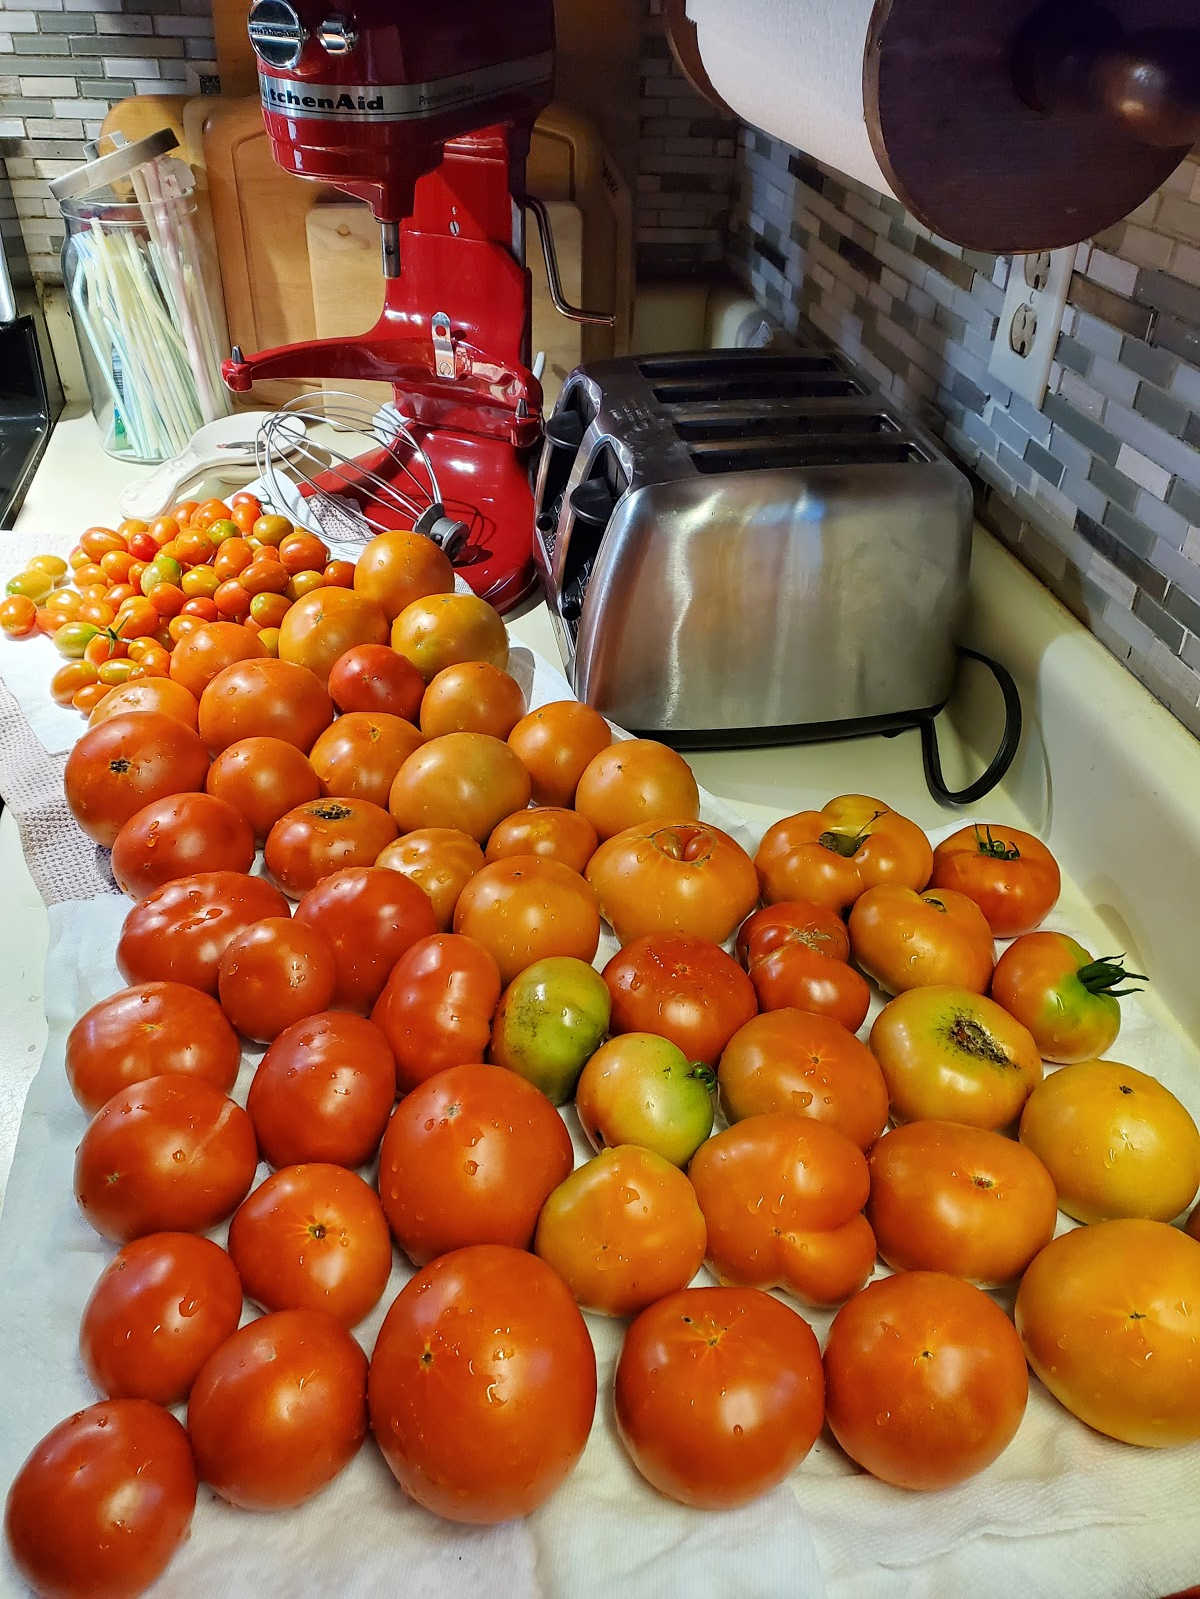 Tomatoes from the garden drying and ripening on kitchen counter.